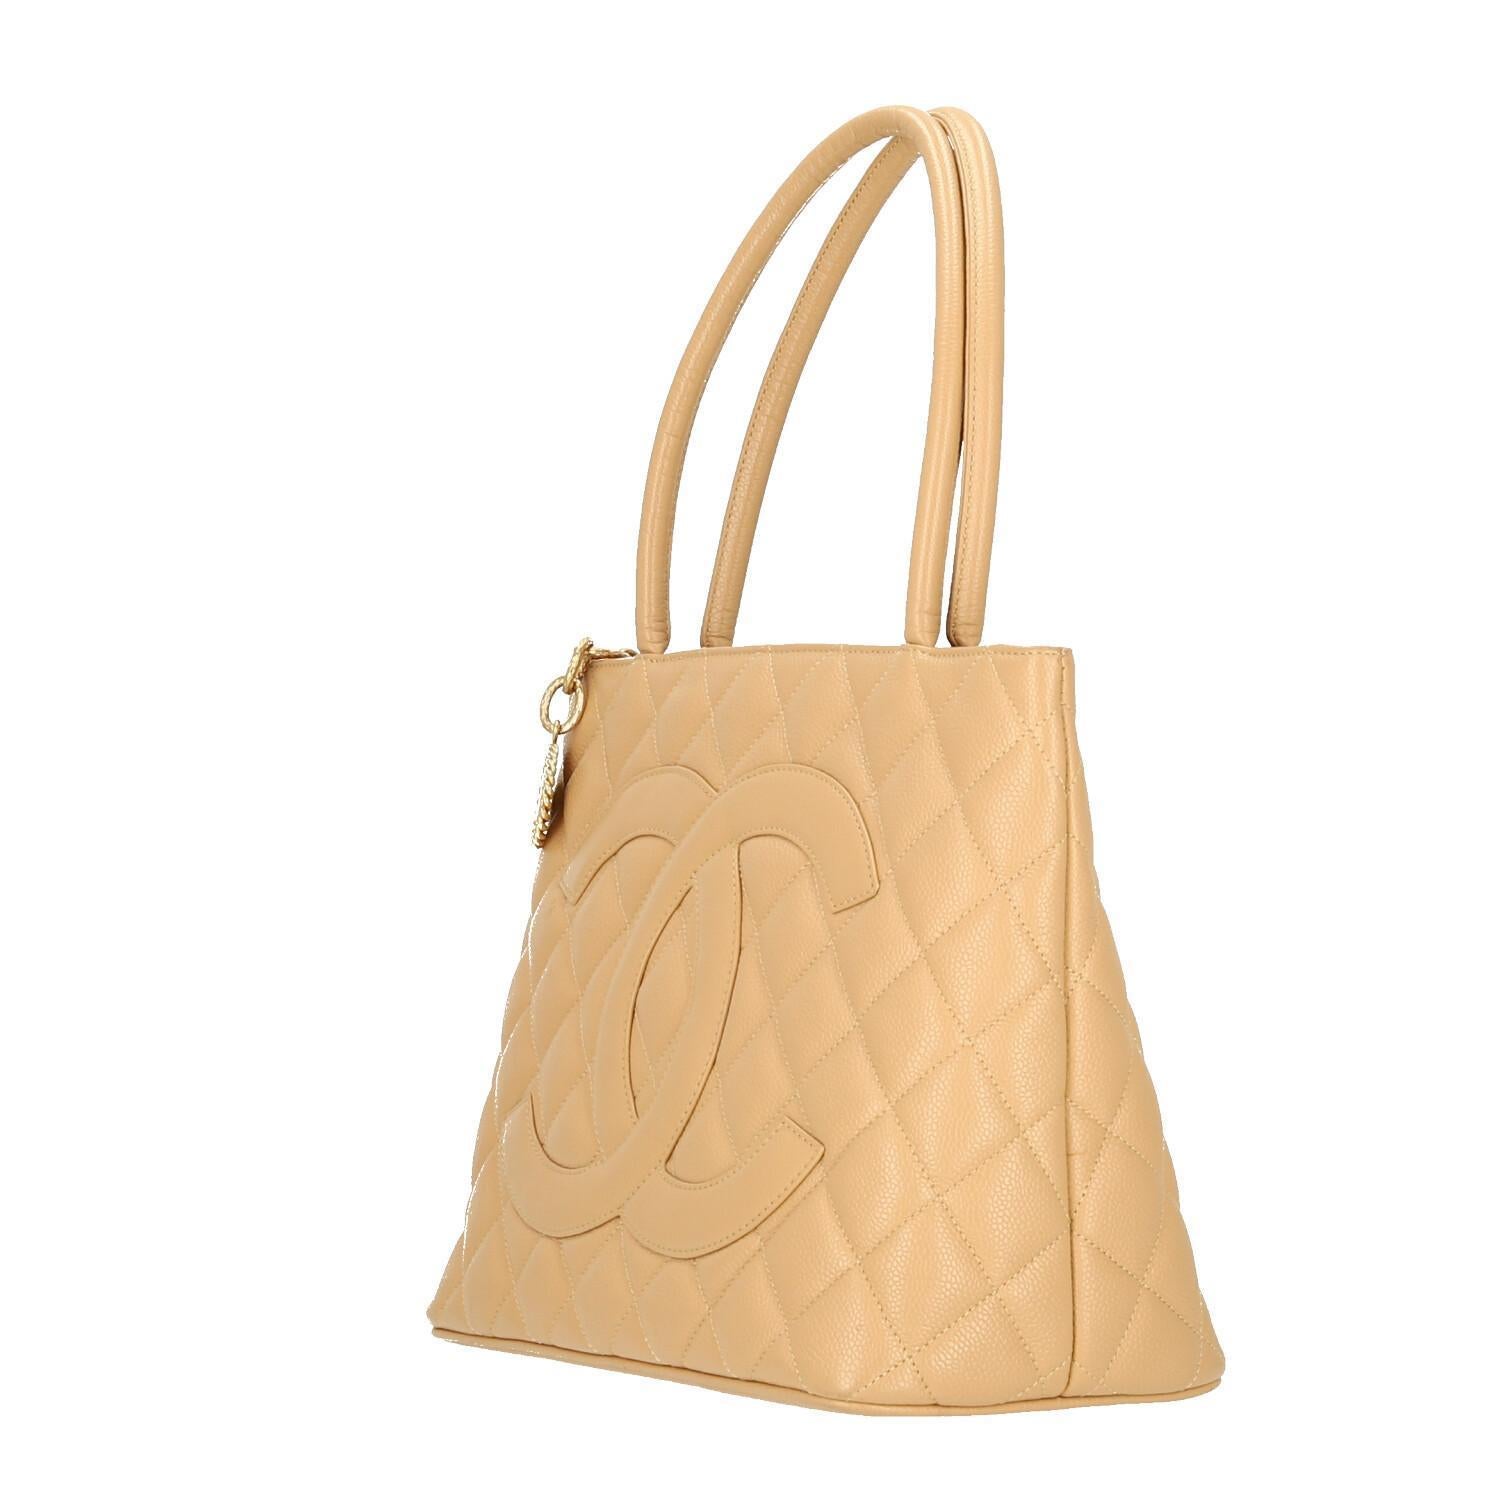 Chanel  Beige Caviar Leather Medallion  Shoulder Bag
This CHANEL tote is like new! 
It is in perfect condition, and the most beautiful rich Beige color! 
The rose gold medallion on the Chanel tote bag is attached to the zipper and features a pocket